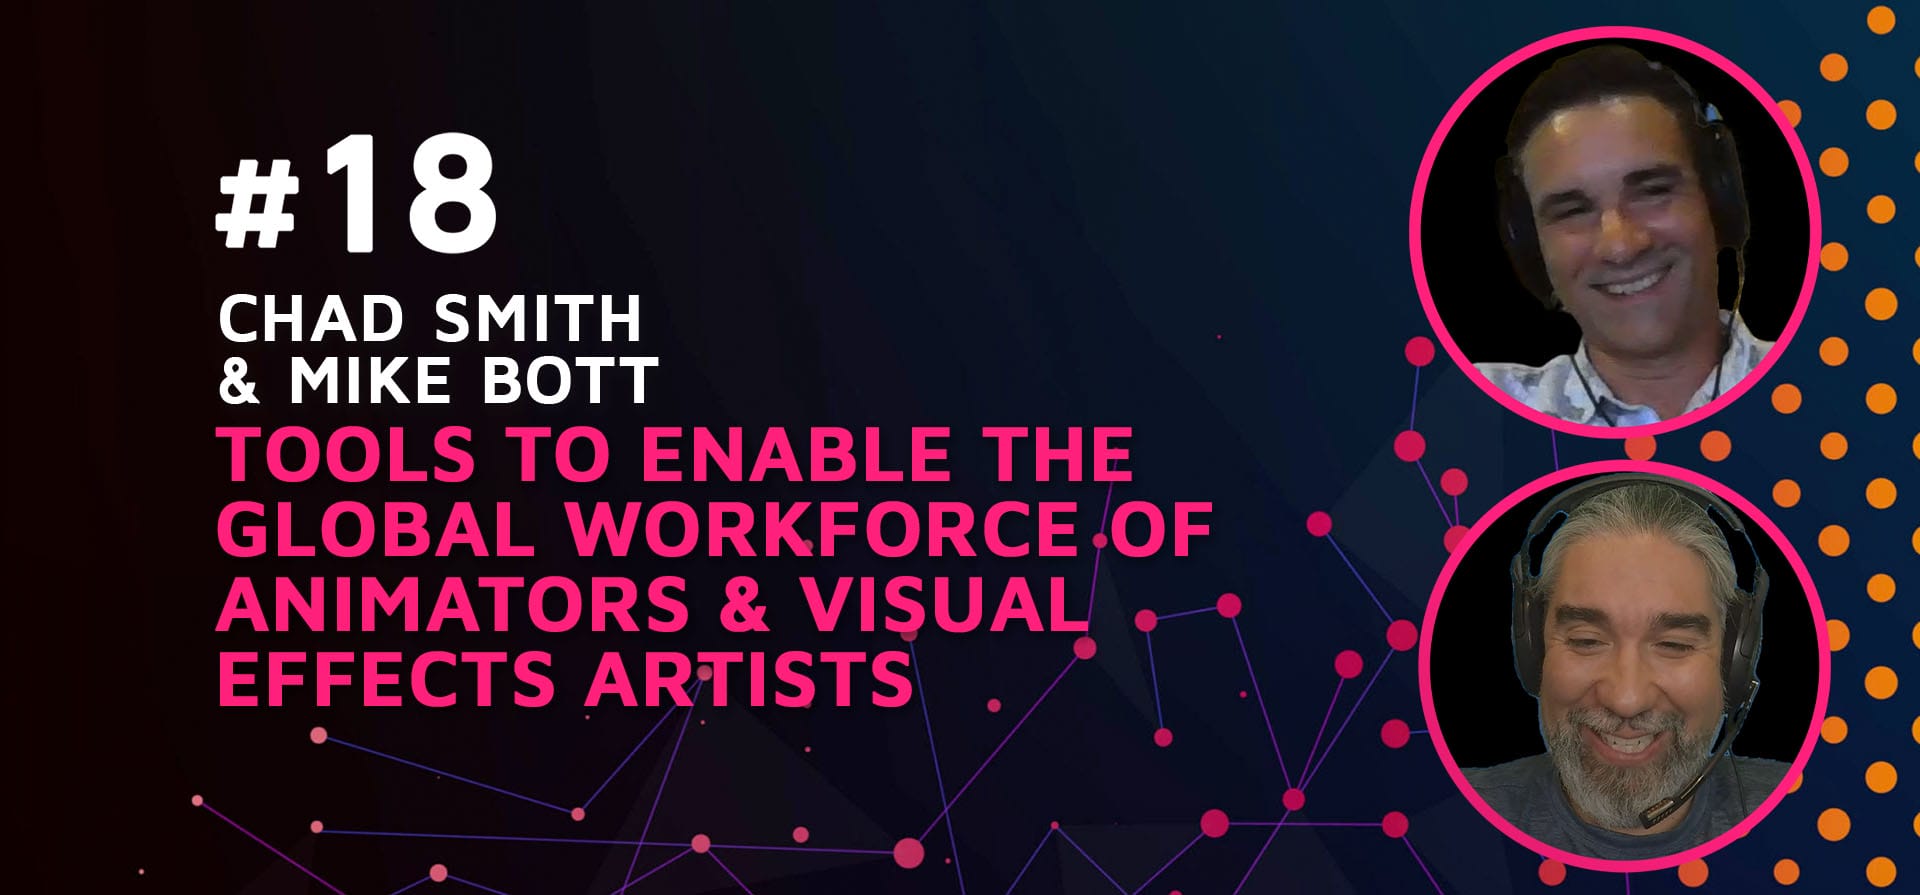 Episode 18: Tools to Enable the Global Workforce of Animators & Visual Effects Artists with Chad Smith and Mike Bott